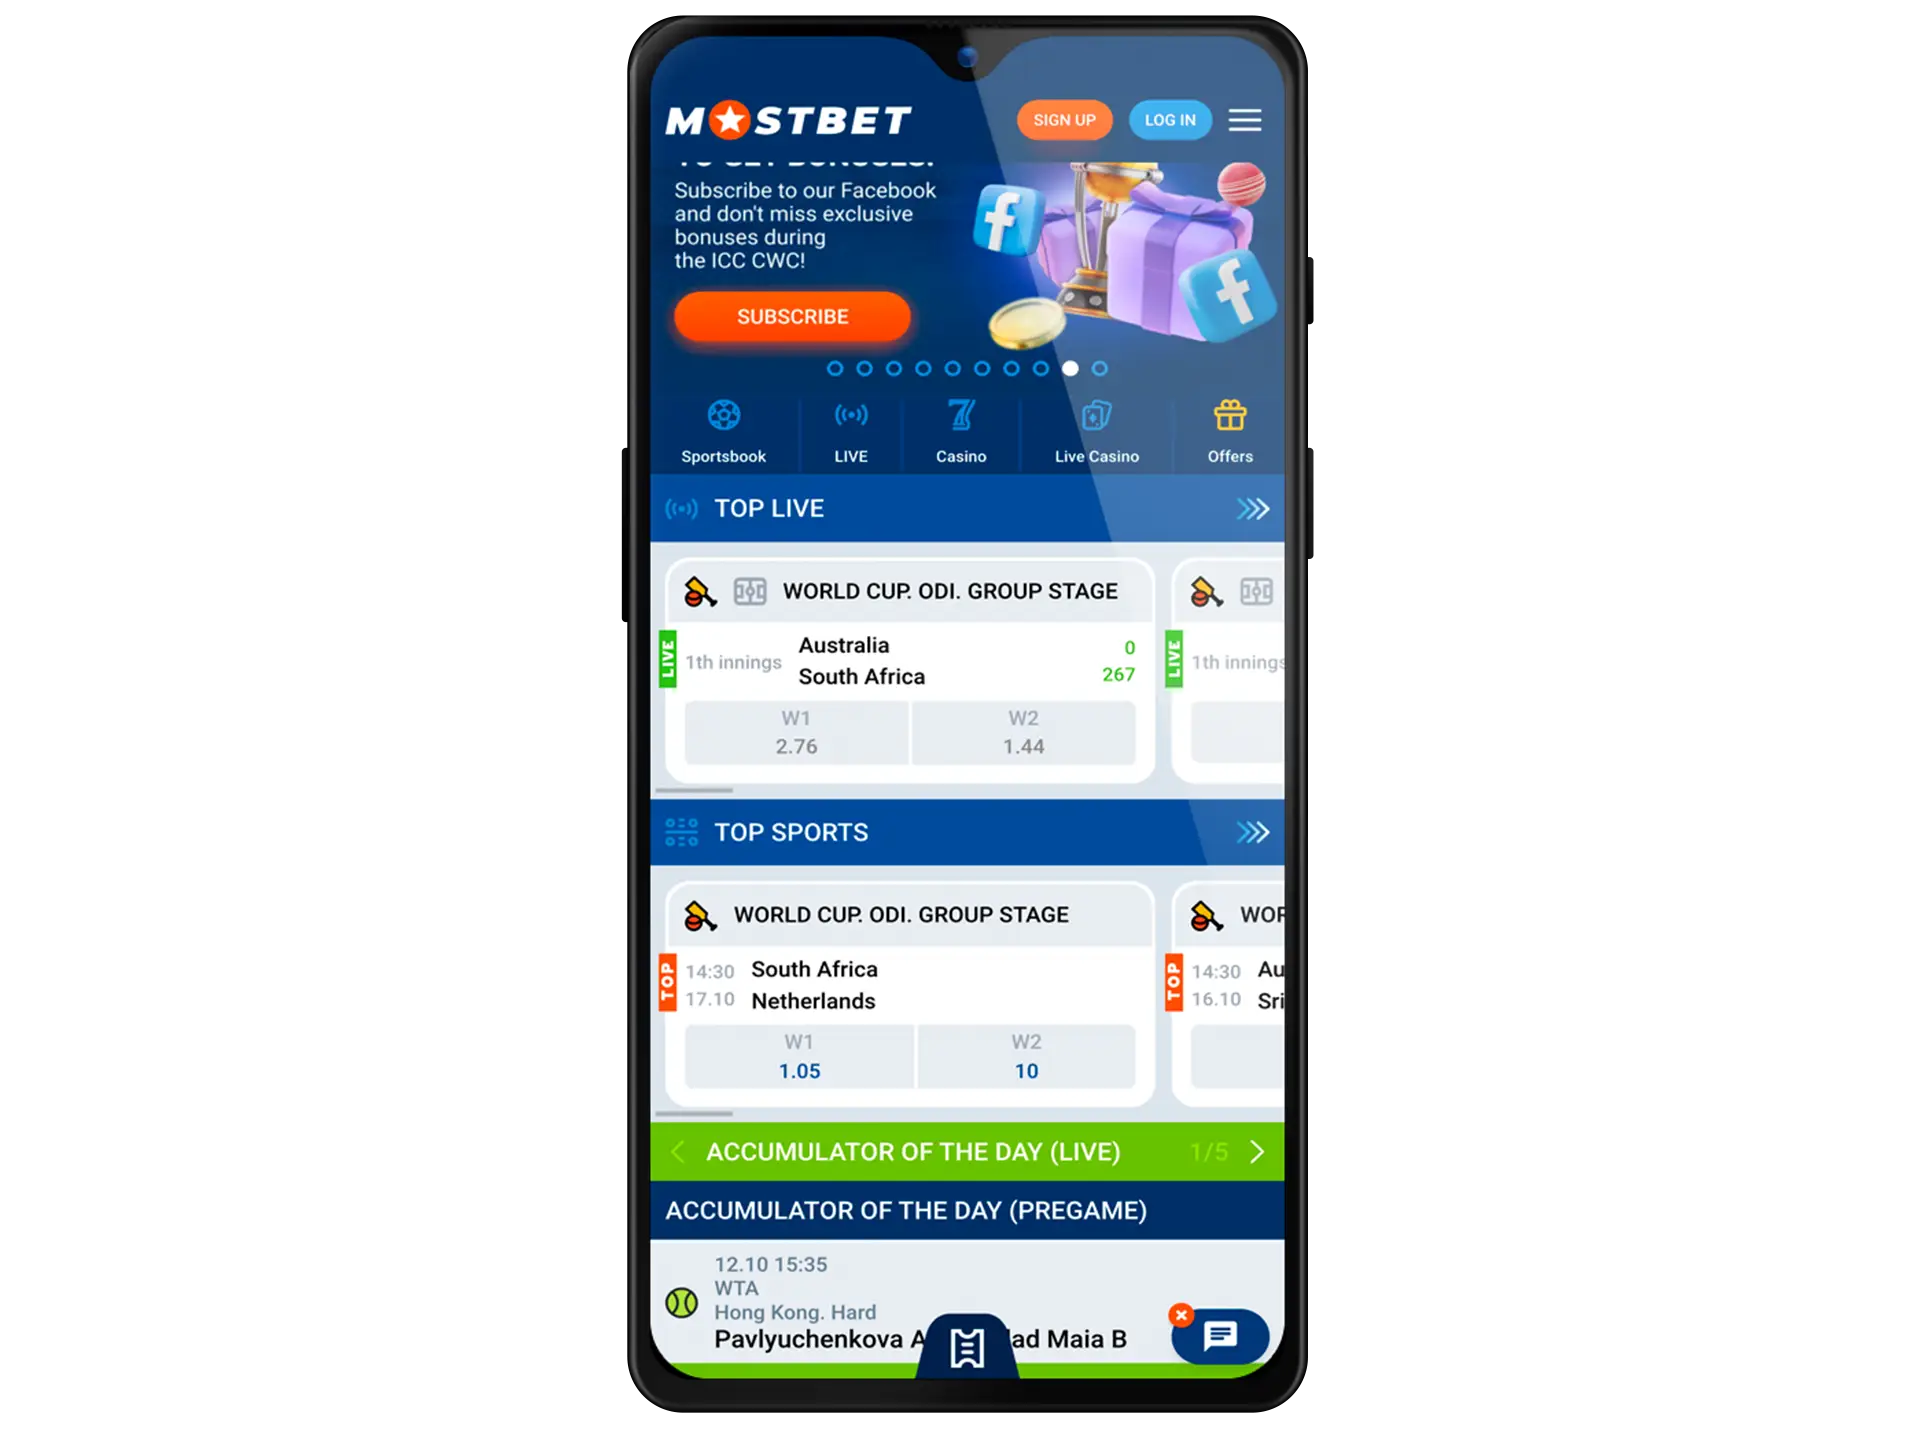 Being far away from home you can stay connected to betting or casino, in your smartphone you will have access to the full world of gambling Mostbet.